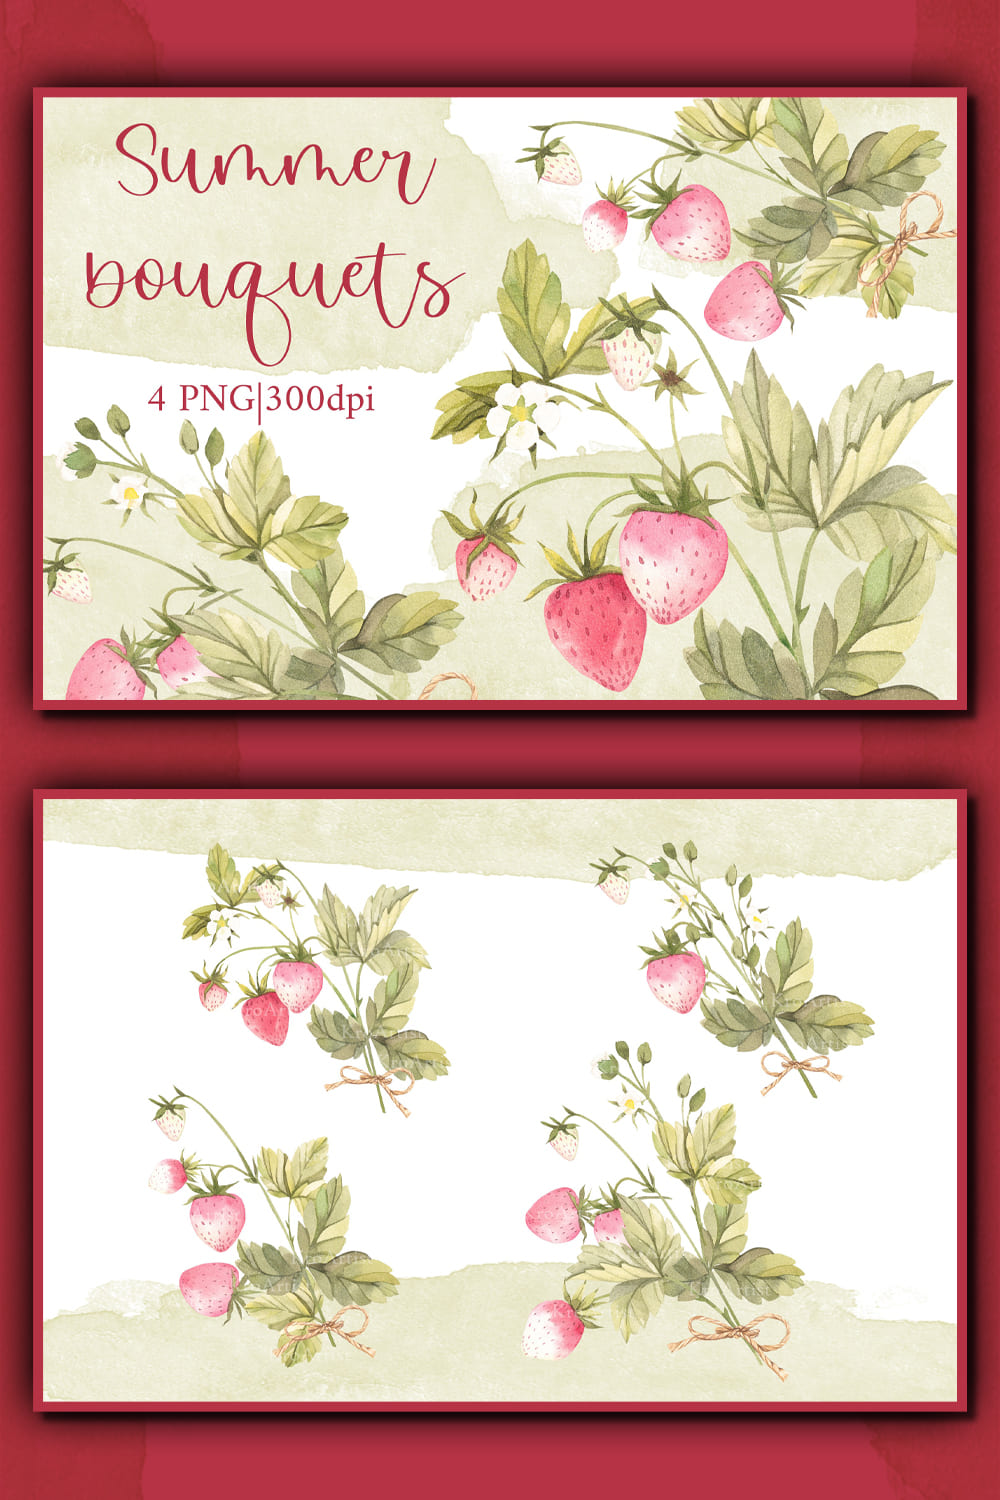 On a burgundy background, two parallel images with bouquets of strawberries.